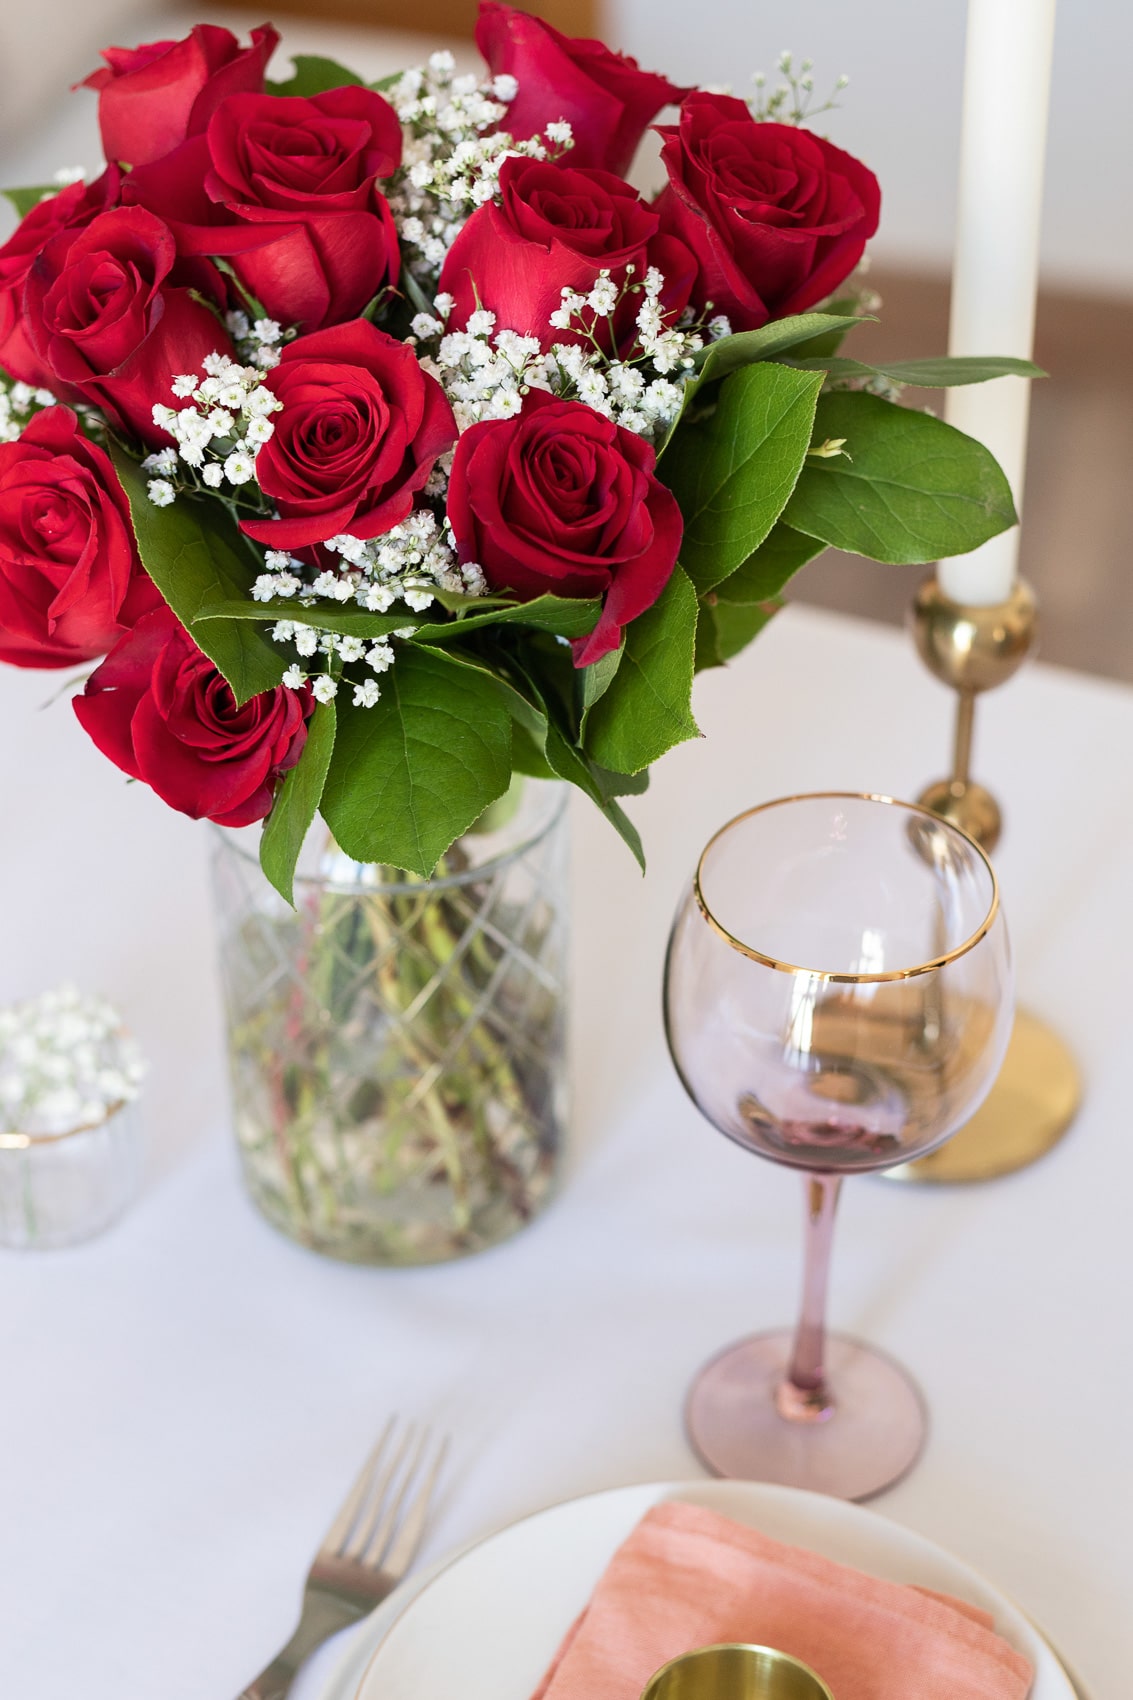 Red roses on a table with wine glass